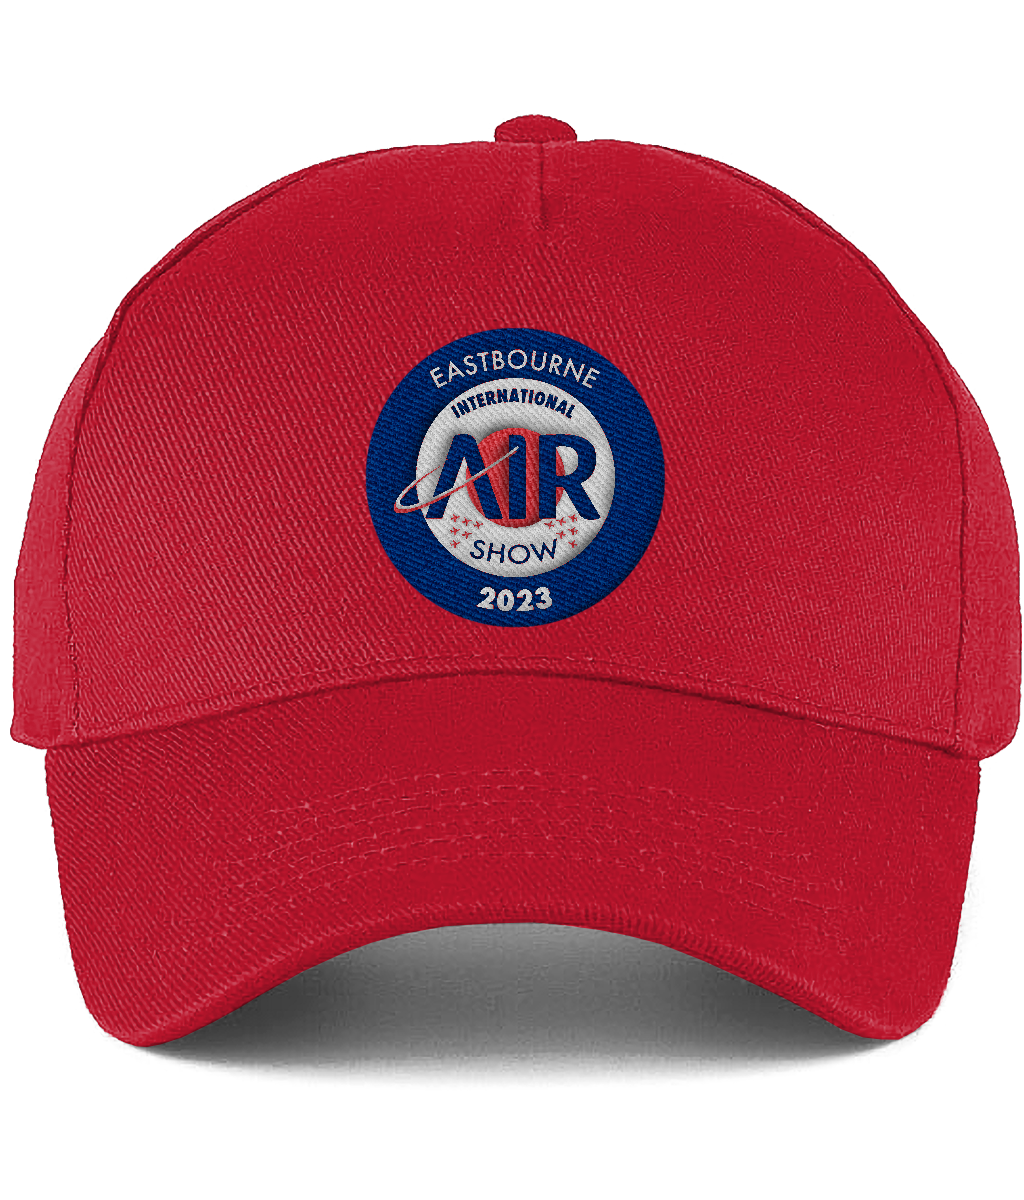 Eastbourne Airshow Official Collectors Cap (Adult) *Limited Edition*